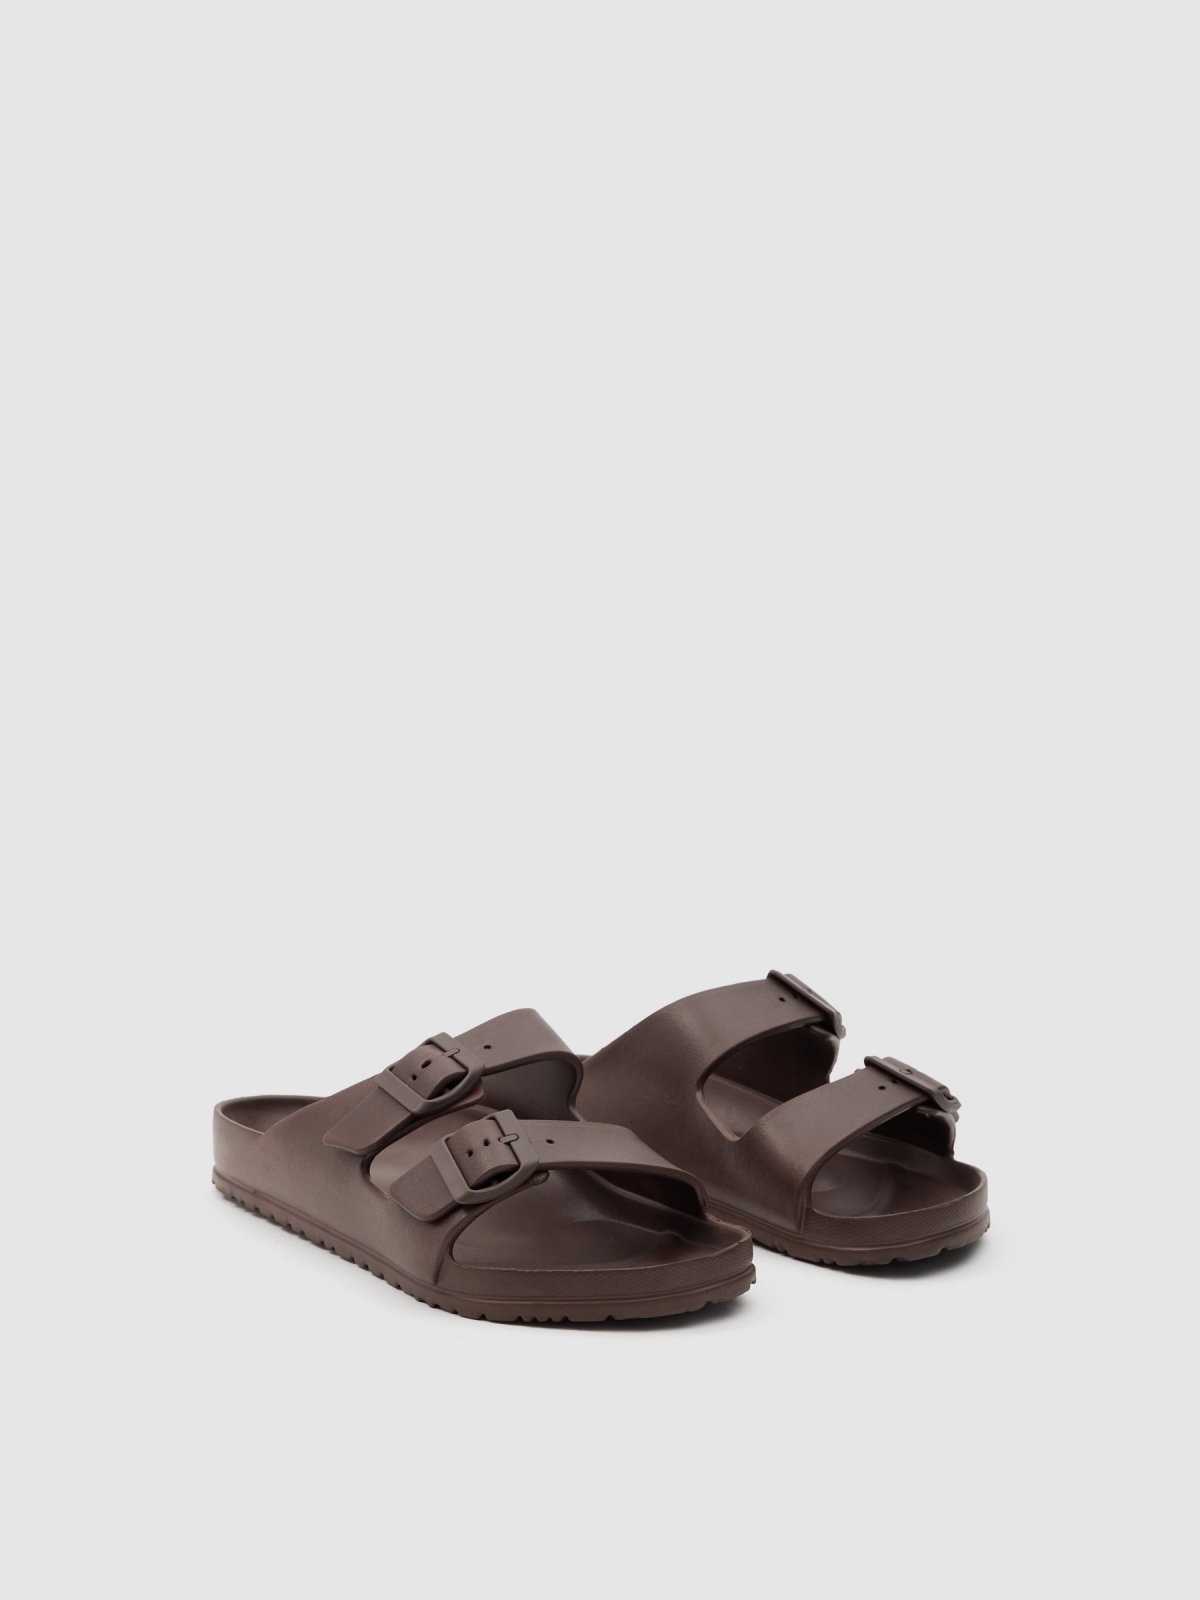 Double buckle flip flop dark brown lateral view